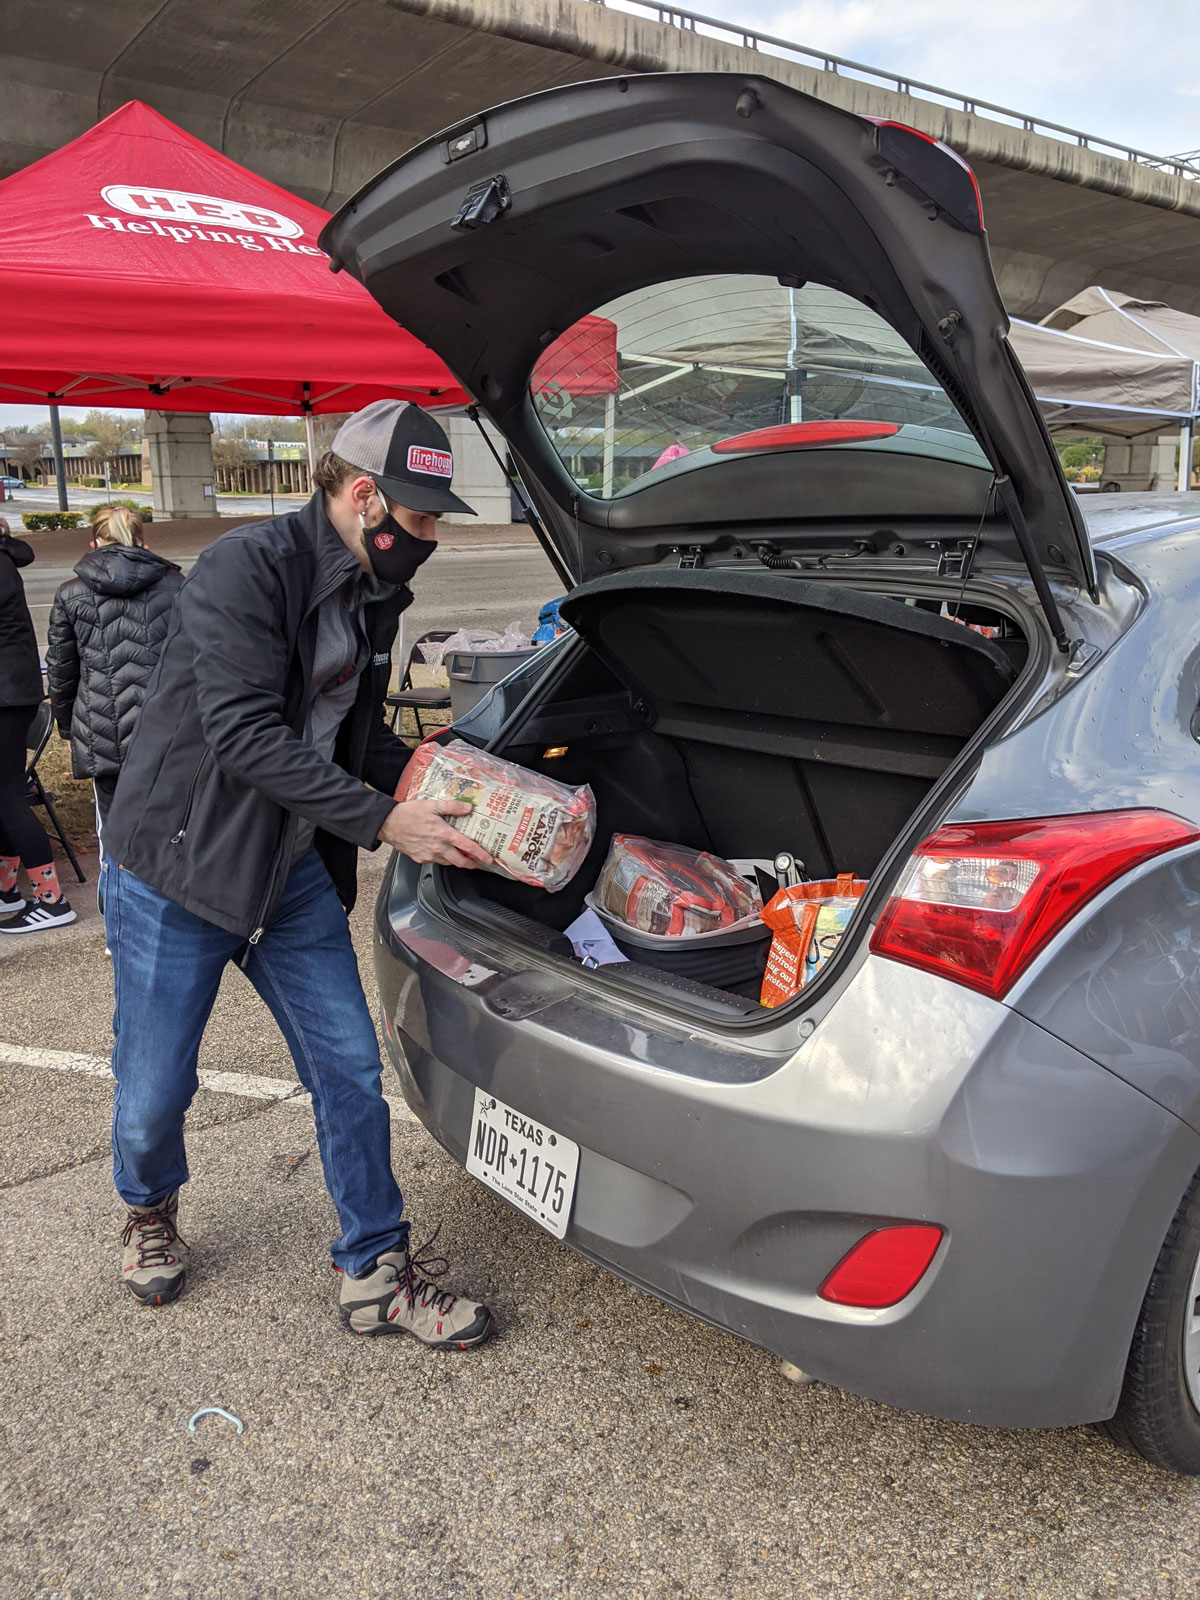 Firehouse worked with AHS and HEB to distribute hundreds of pounds of free cat and dog food to Austin pet parents. The pet food was graciously donated by HEB. Firehouse continued these events throughout the fall of 2021.